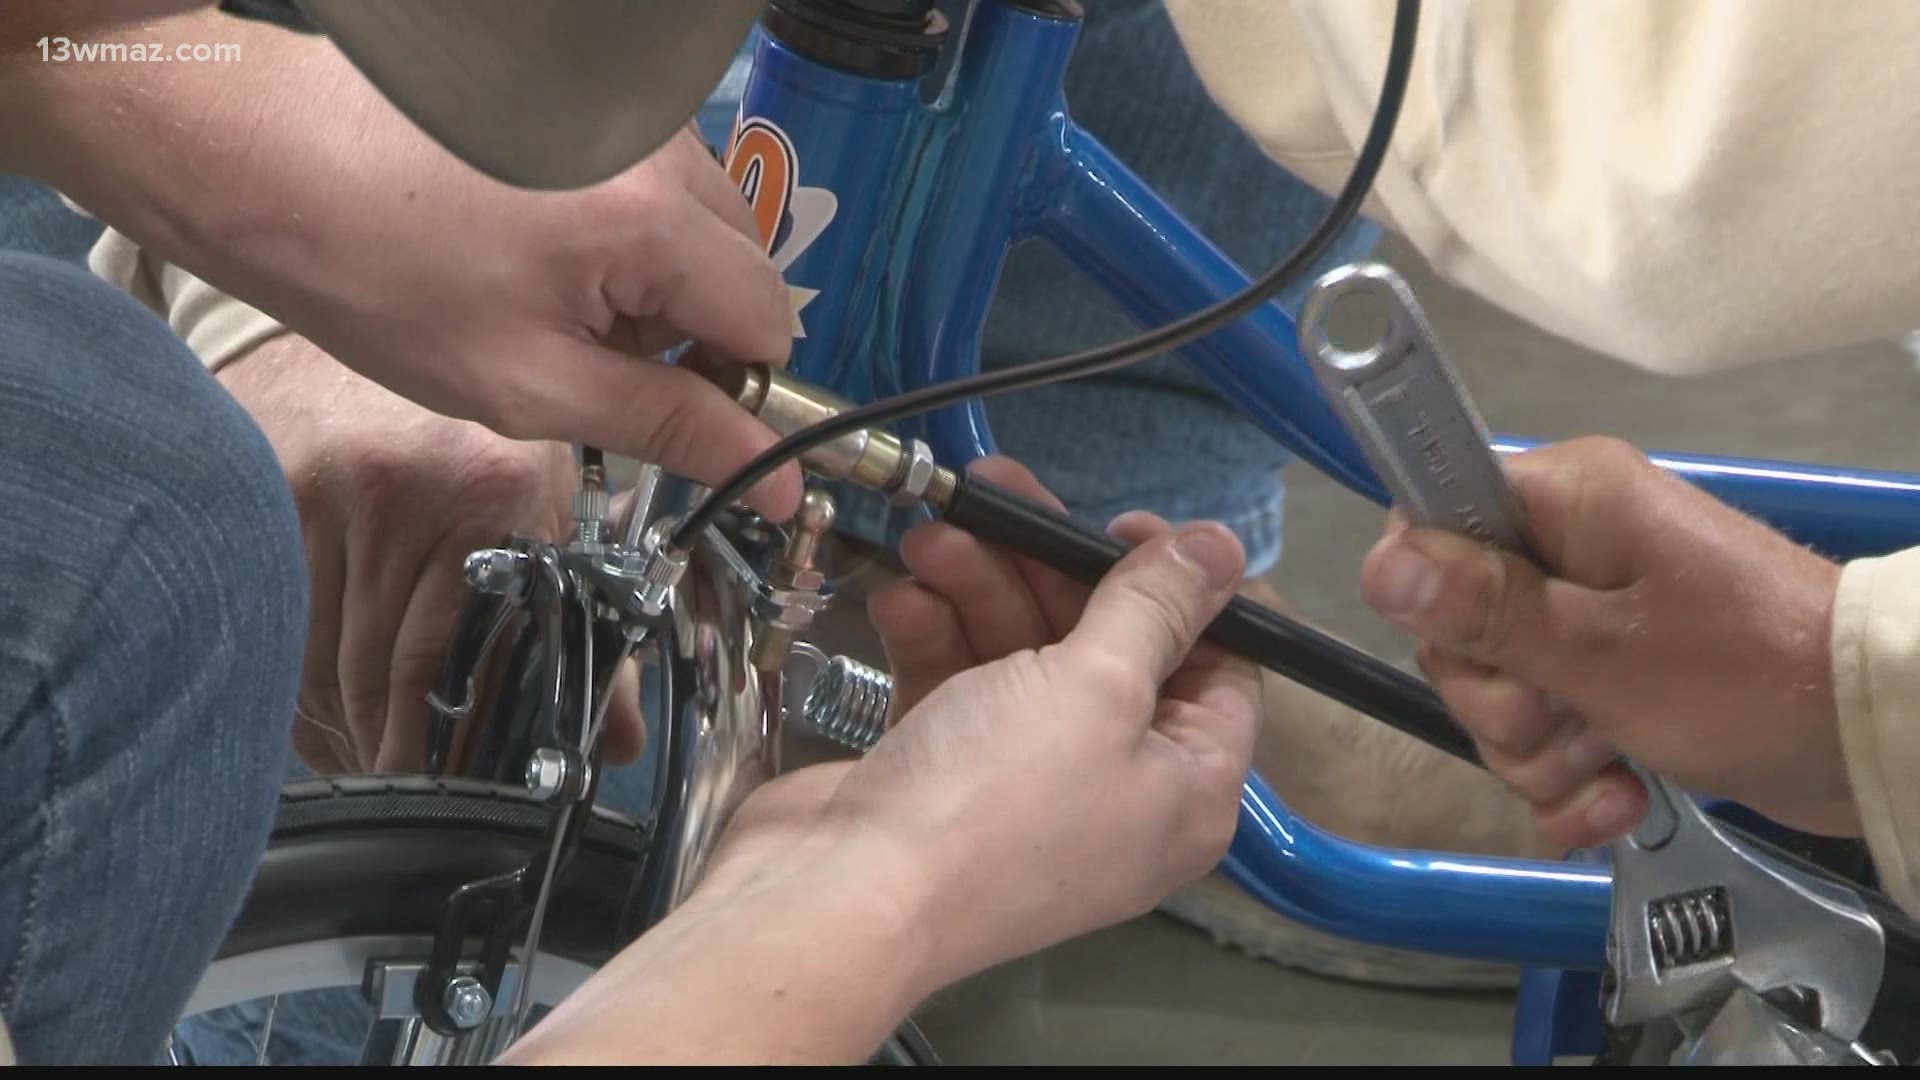 The group partnered with the Wellspring Wellness Center Tuesday to make the adaptive bikes for disabled children.